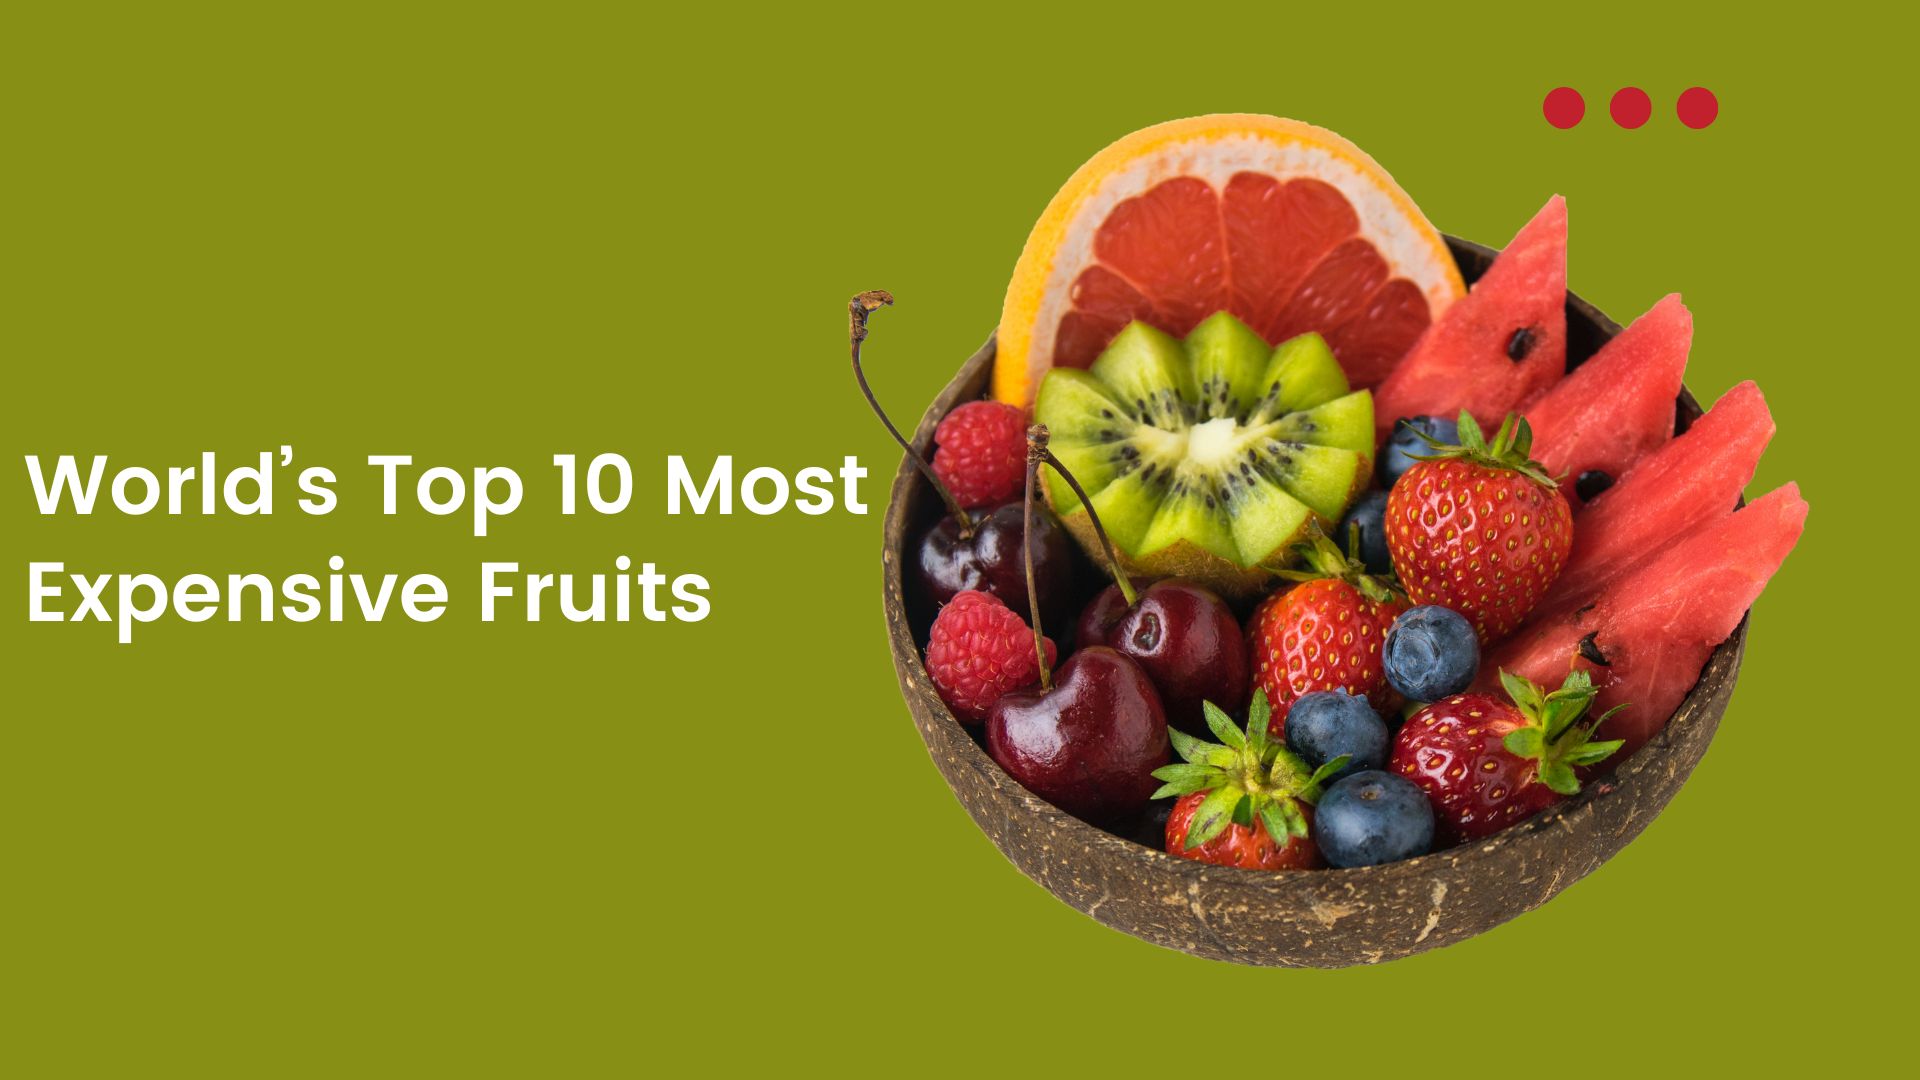 The 10 Top Most Expensive Fruits in the World